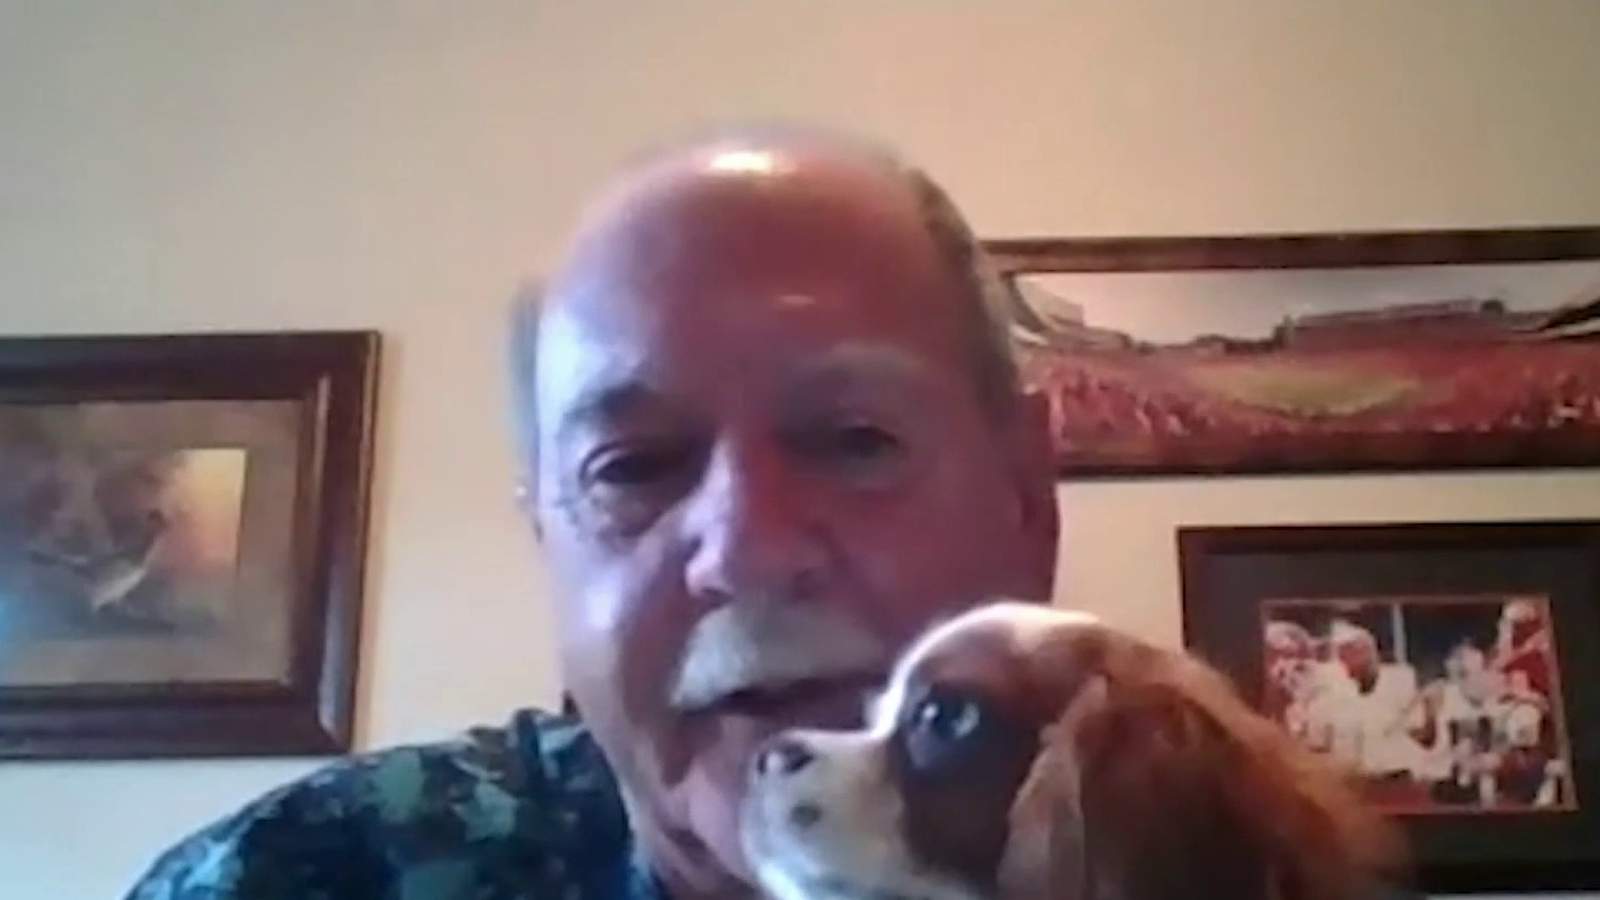 Puppy pried from gator’s mouth by his human doing just fine